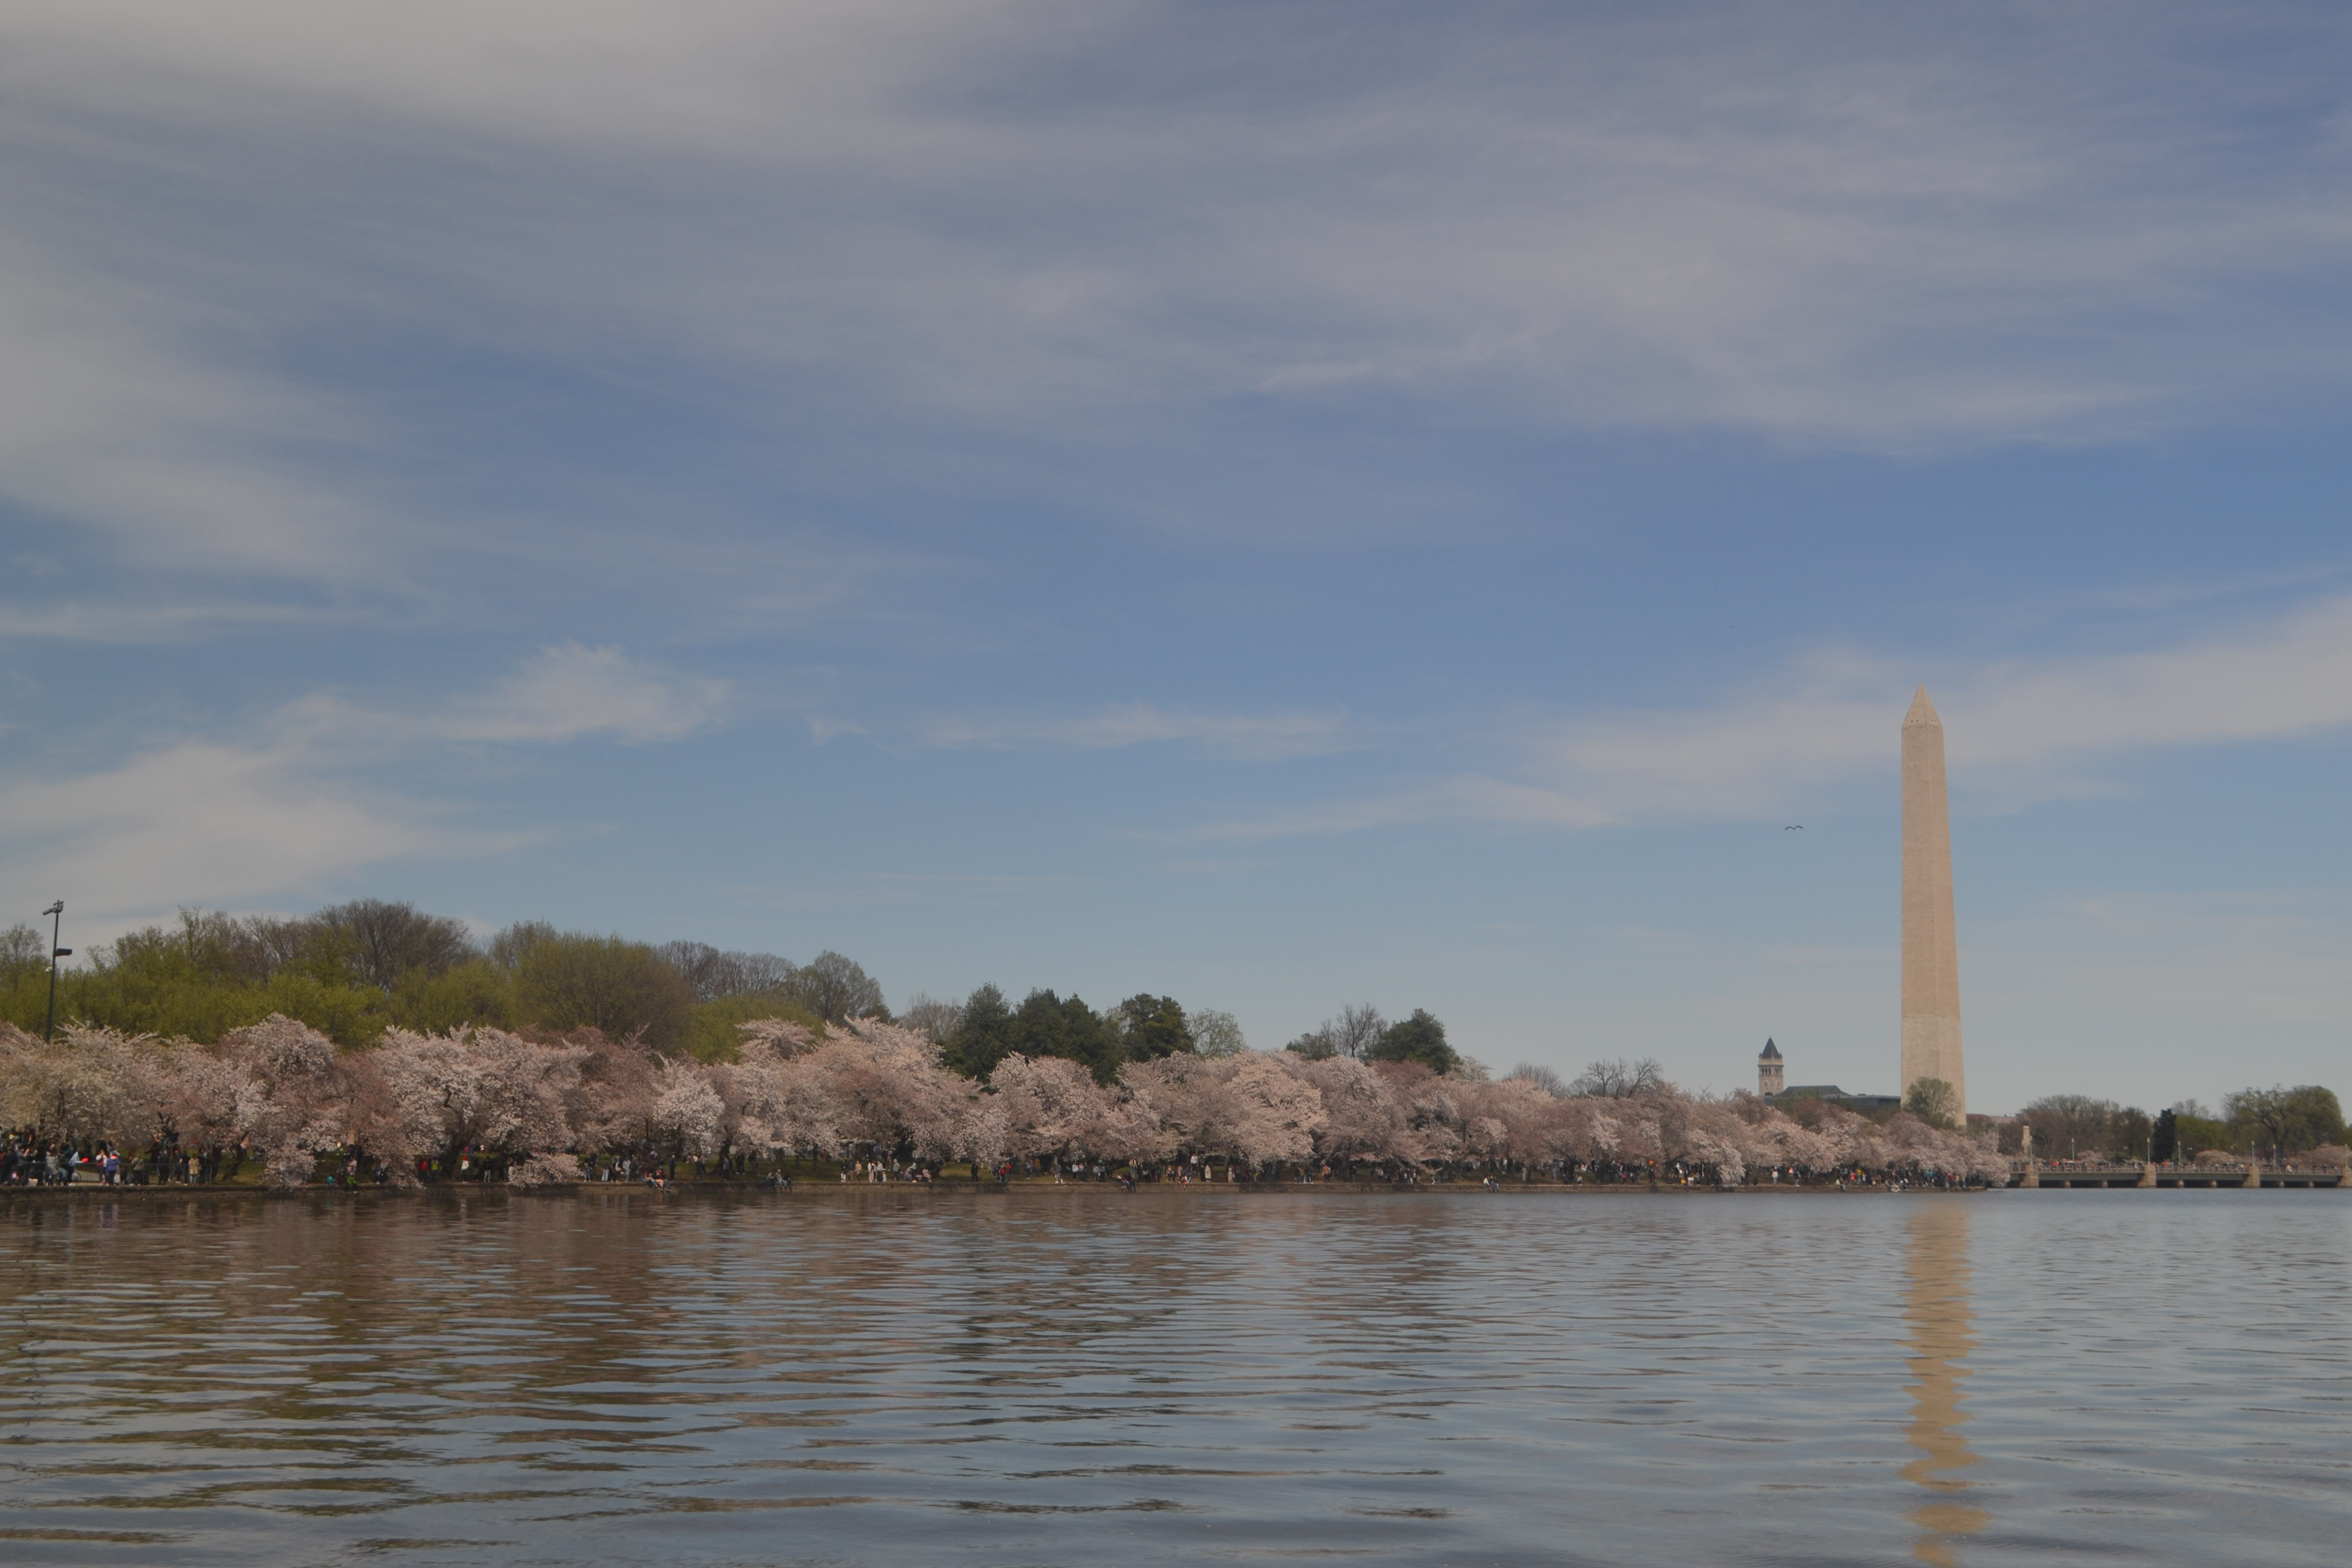 A white stone obelisk is reflected in water.  Between the obelisk and the water is a row of trees.